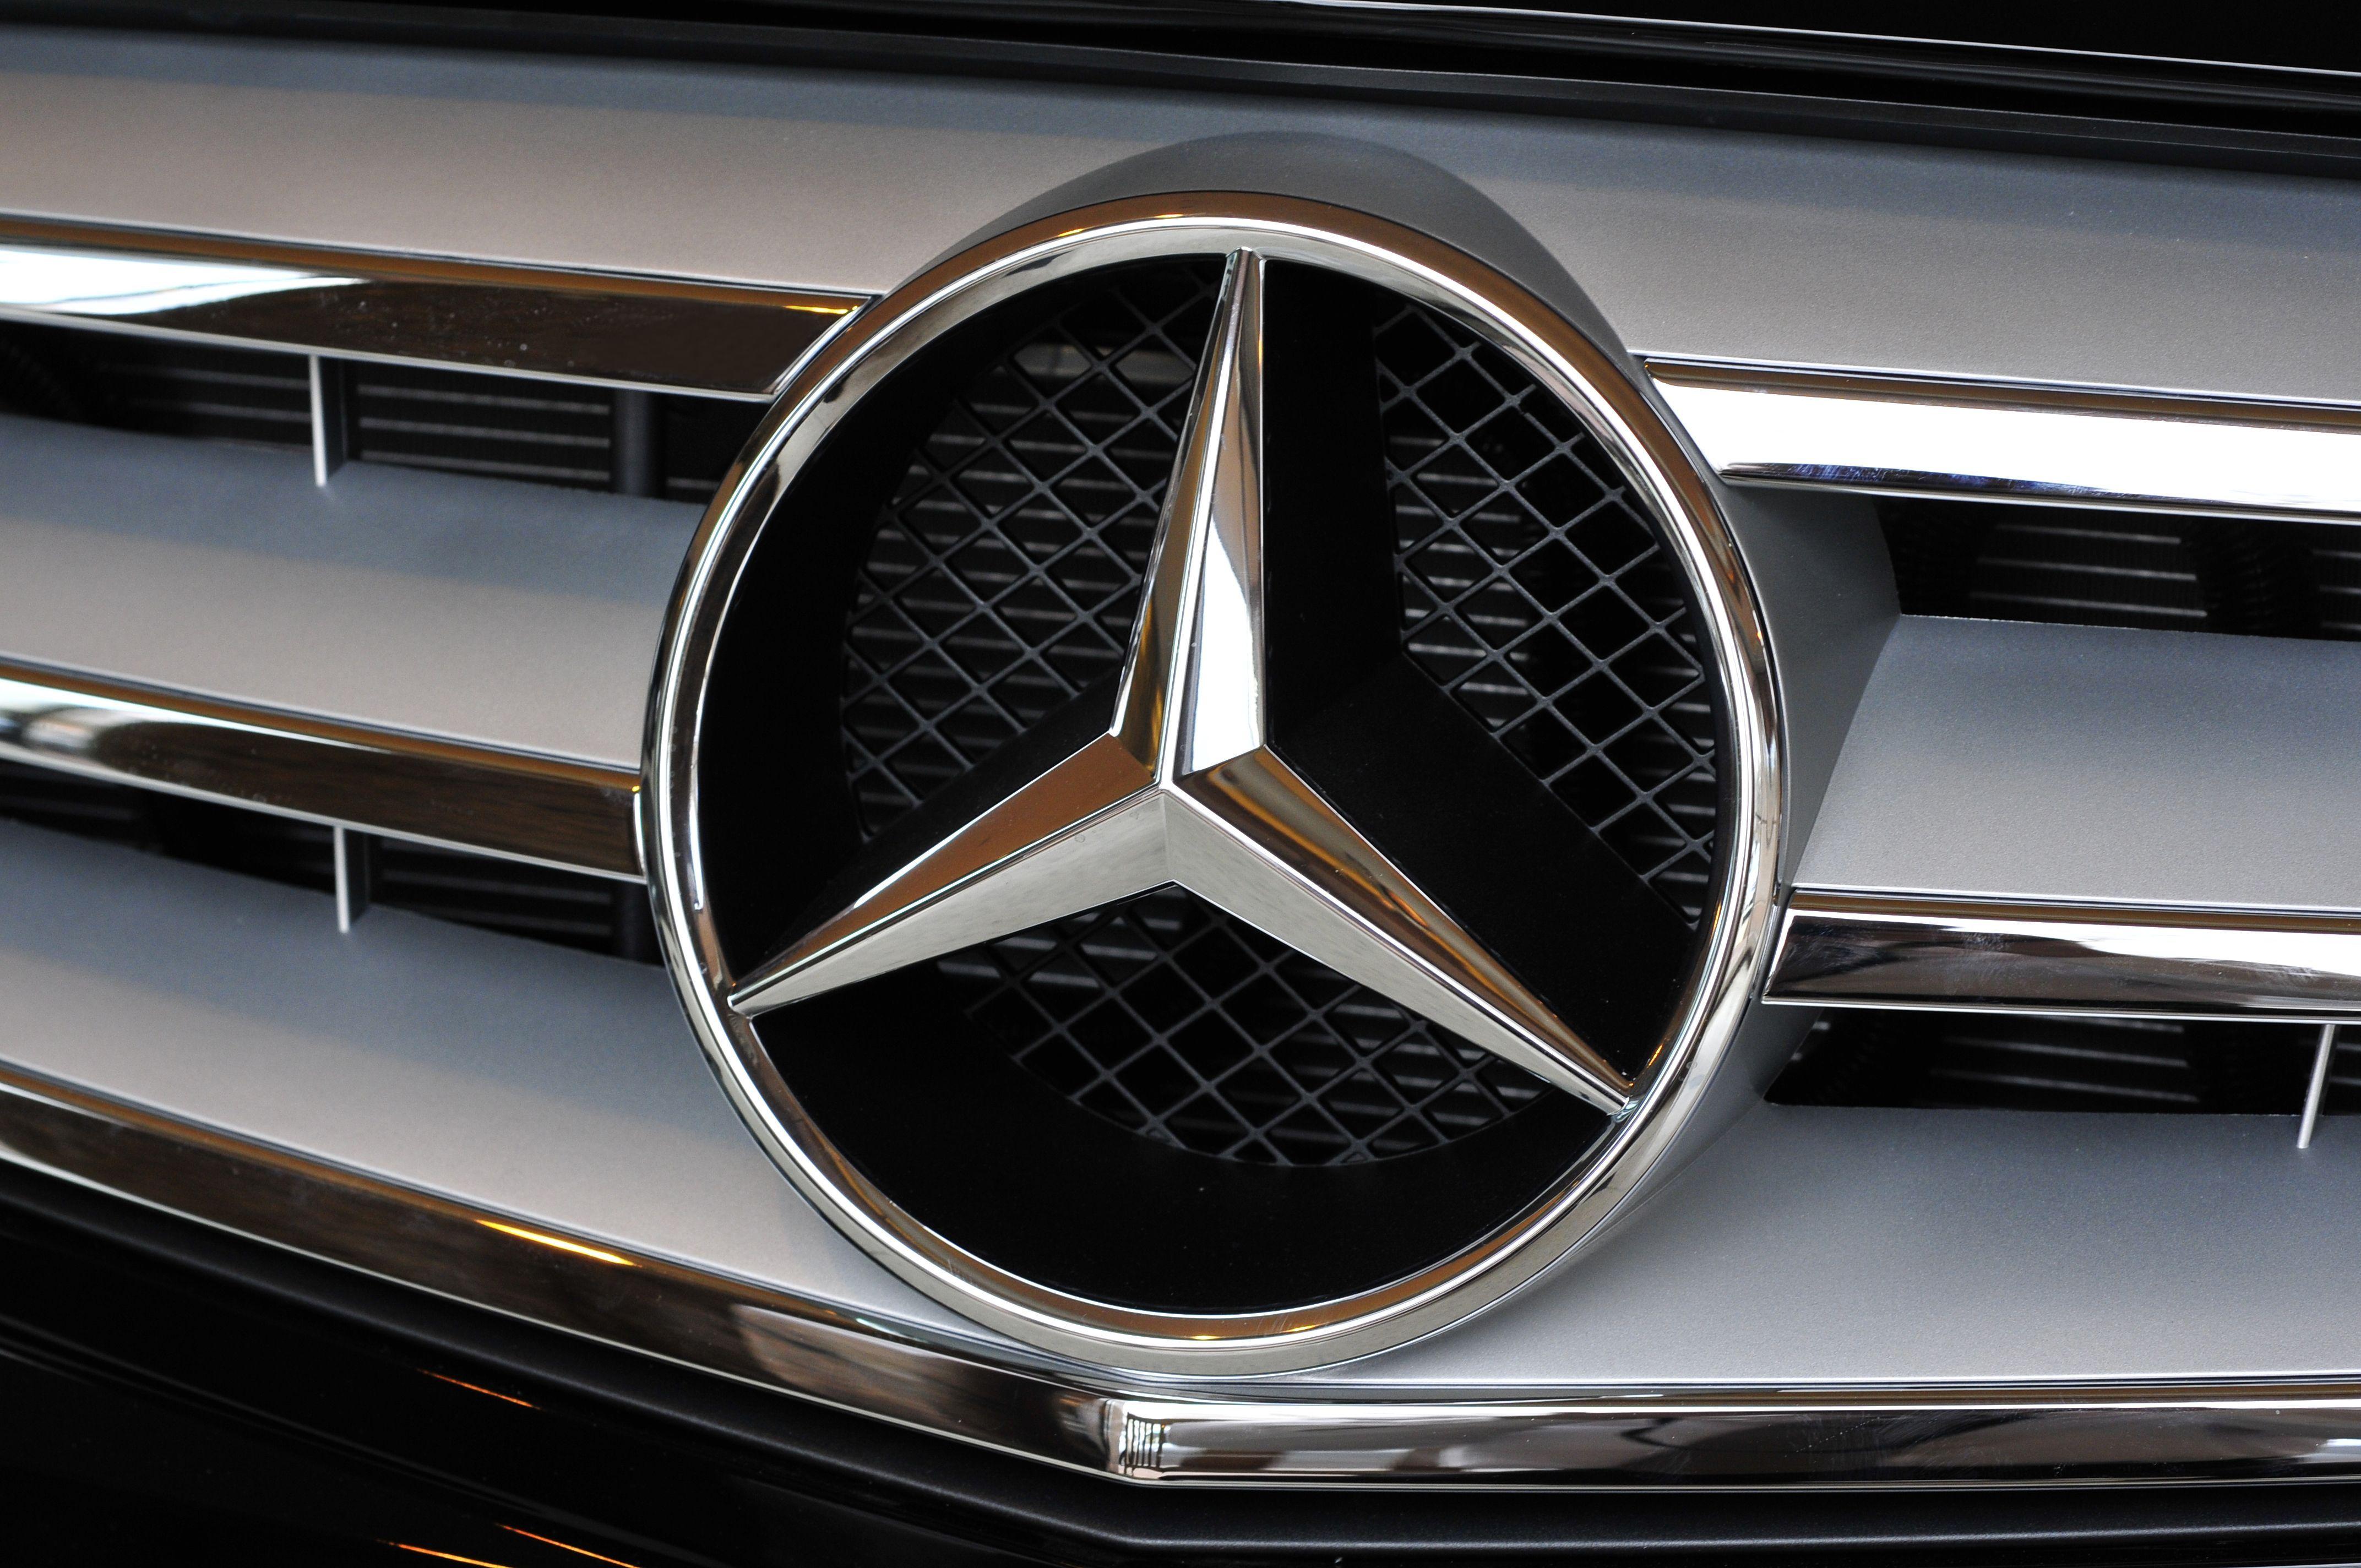 Pointed C Logo - Mercedes-Benz 3-Pointed Star on the W204 C-Class | Stars, Emblems ...